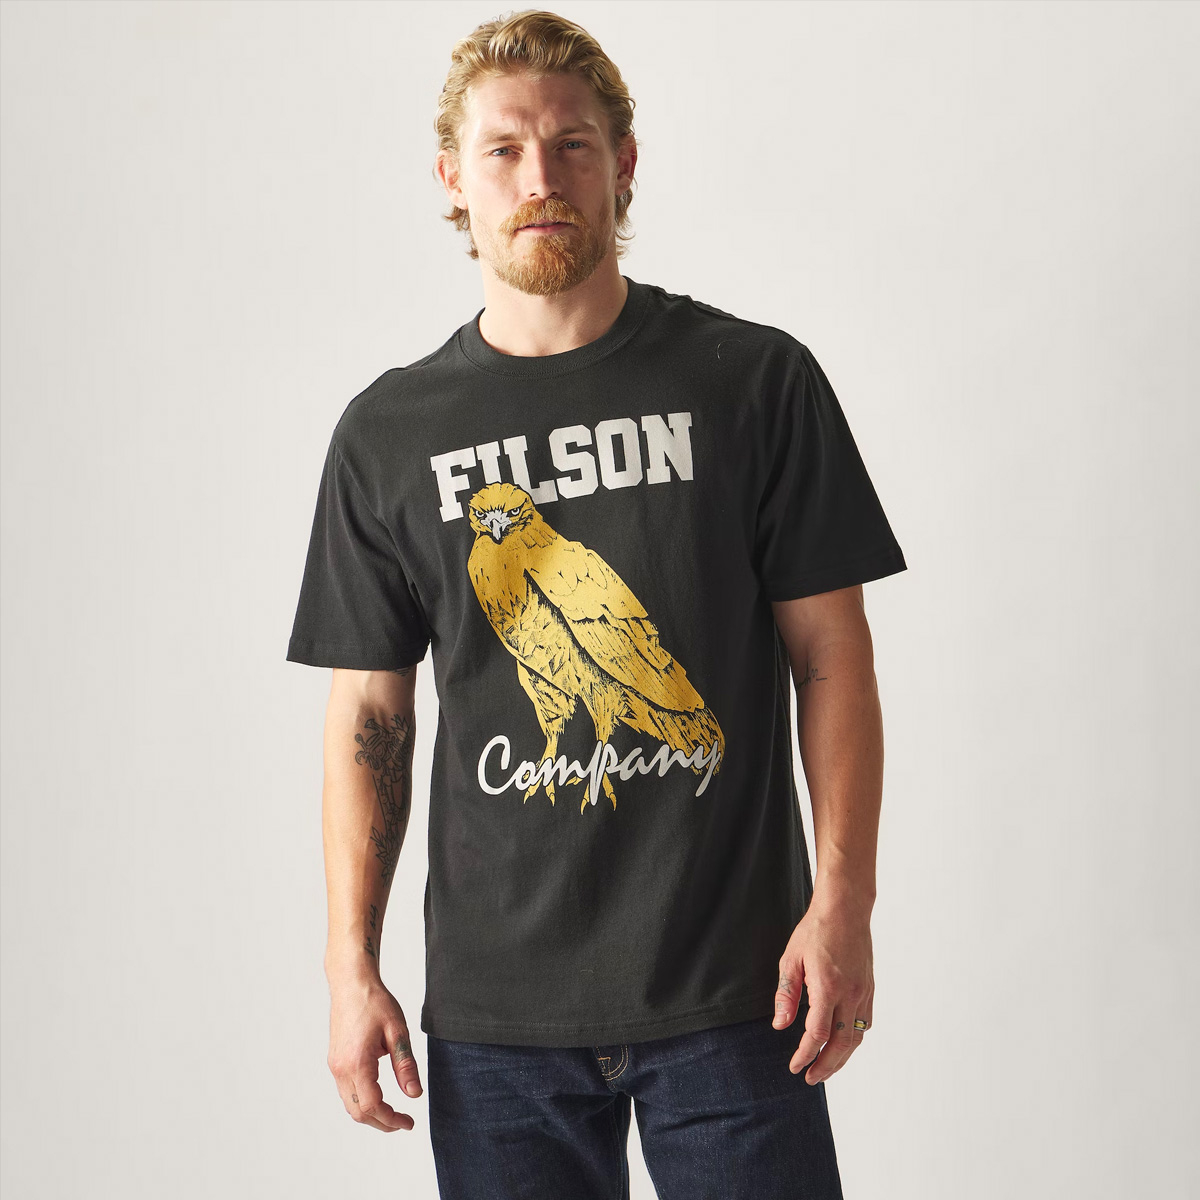 Filson Pioneer Graphic T-Shirt Black/Bird of Grey, made of 100% cotton with texture, structure and a dry-hand feel